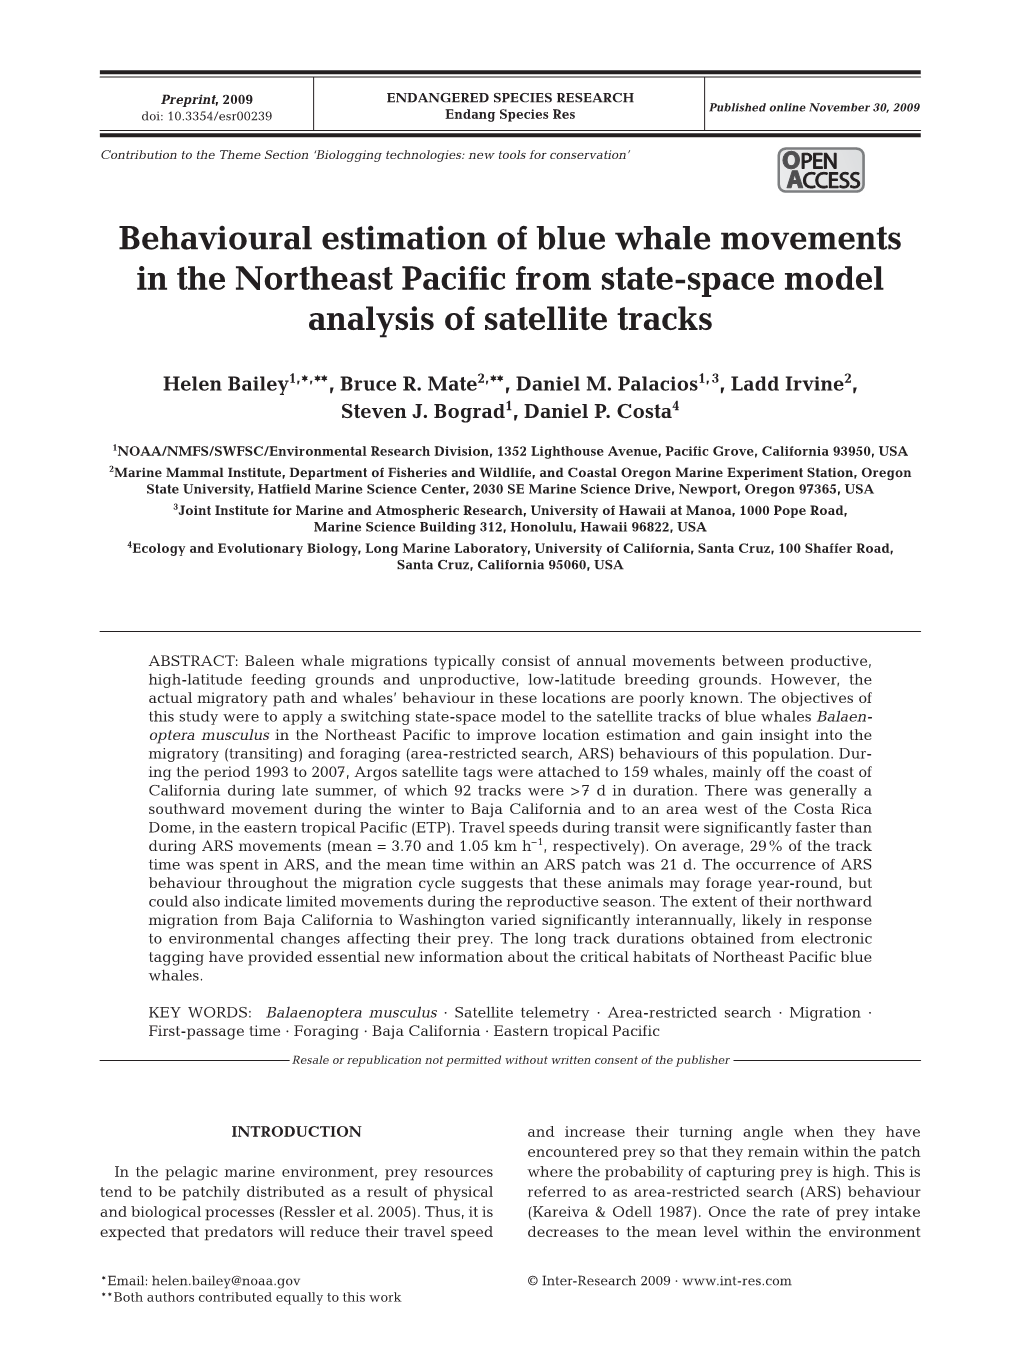 Behavioural Estimation of Blue Whale Movements in the Northeast Pacific from State-Space Model Analysis of Satellite Tracks